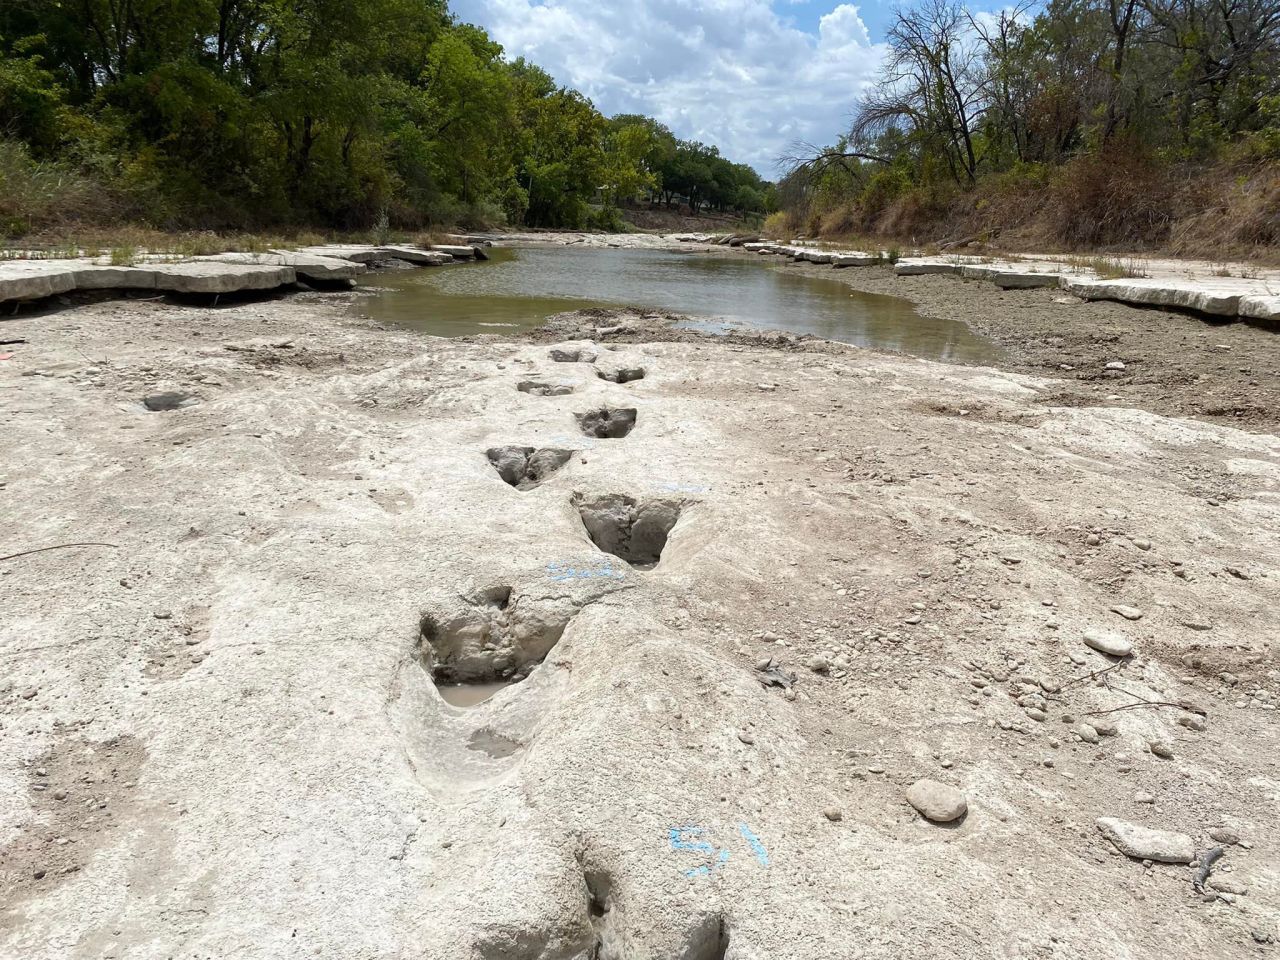 <a href="https://www.cnn.com/2022/08/23/us/dinosaur-tracks-discovered-texas-park/index.html" target="_blank">Dinosaur tracks</a> from around 113 million years ago are seen along a dried up riverbed in Dinosaur Valley State Park, Texas. This summer's excessive drought has caused a river in the park to dry out completely in most spots, <a href="https://www.facebook.com/DinosaurValleyStatePark/videos/5780894828612048/" target="_blank" target="_blank">revealing the tracks</a>, the park said in a statement on Monday, August 22.